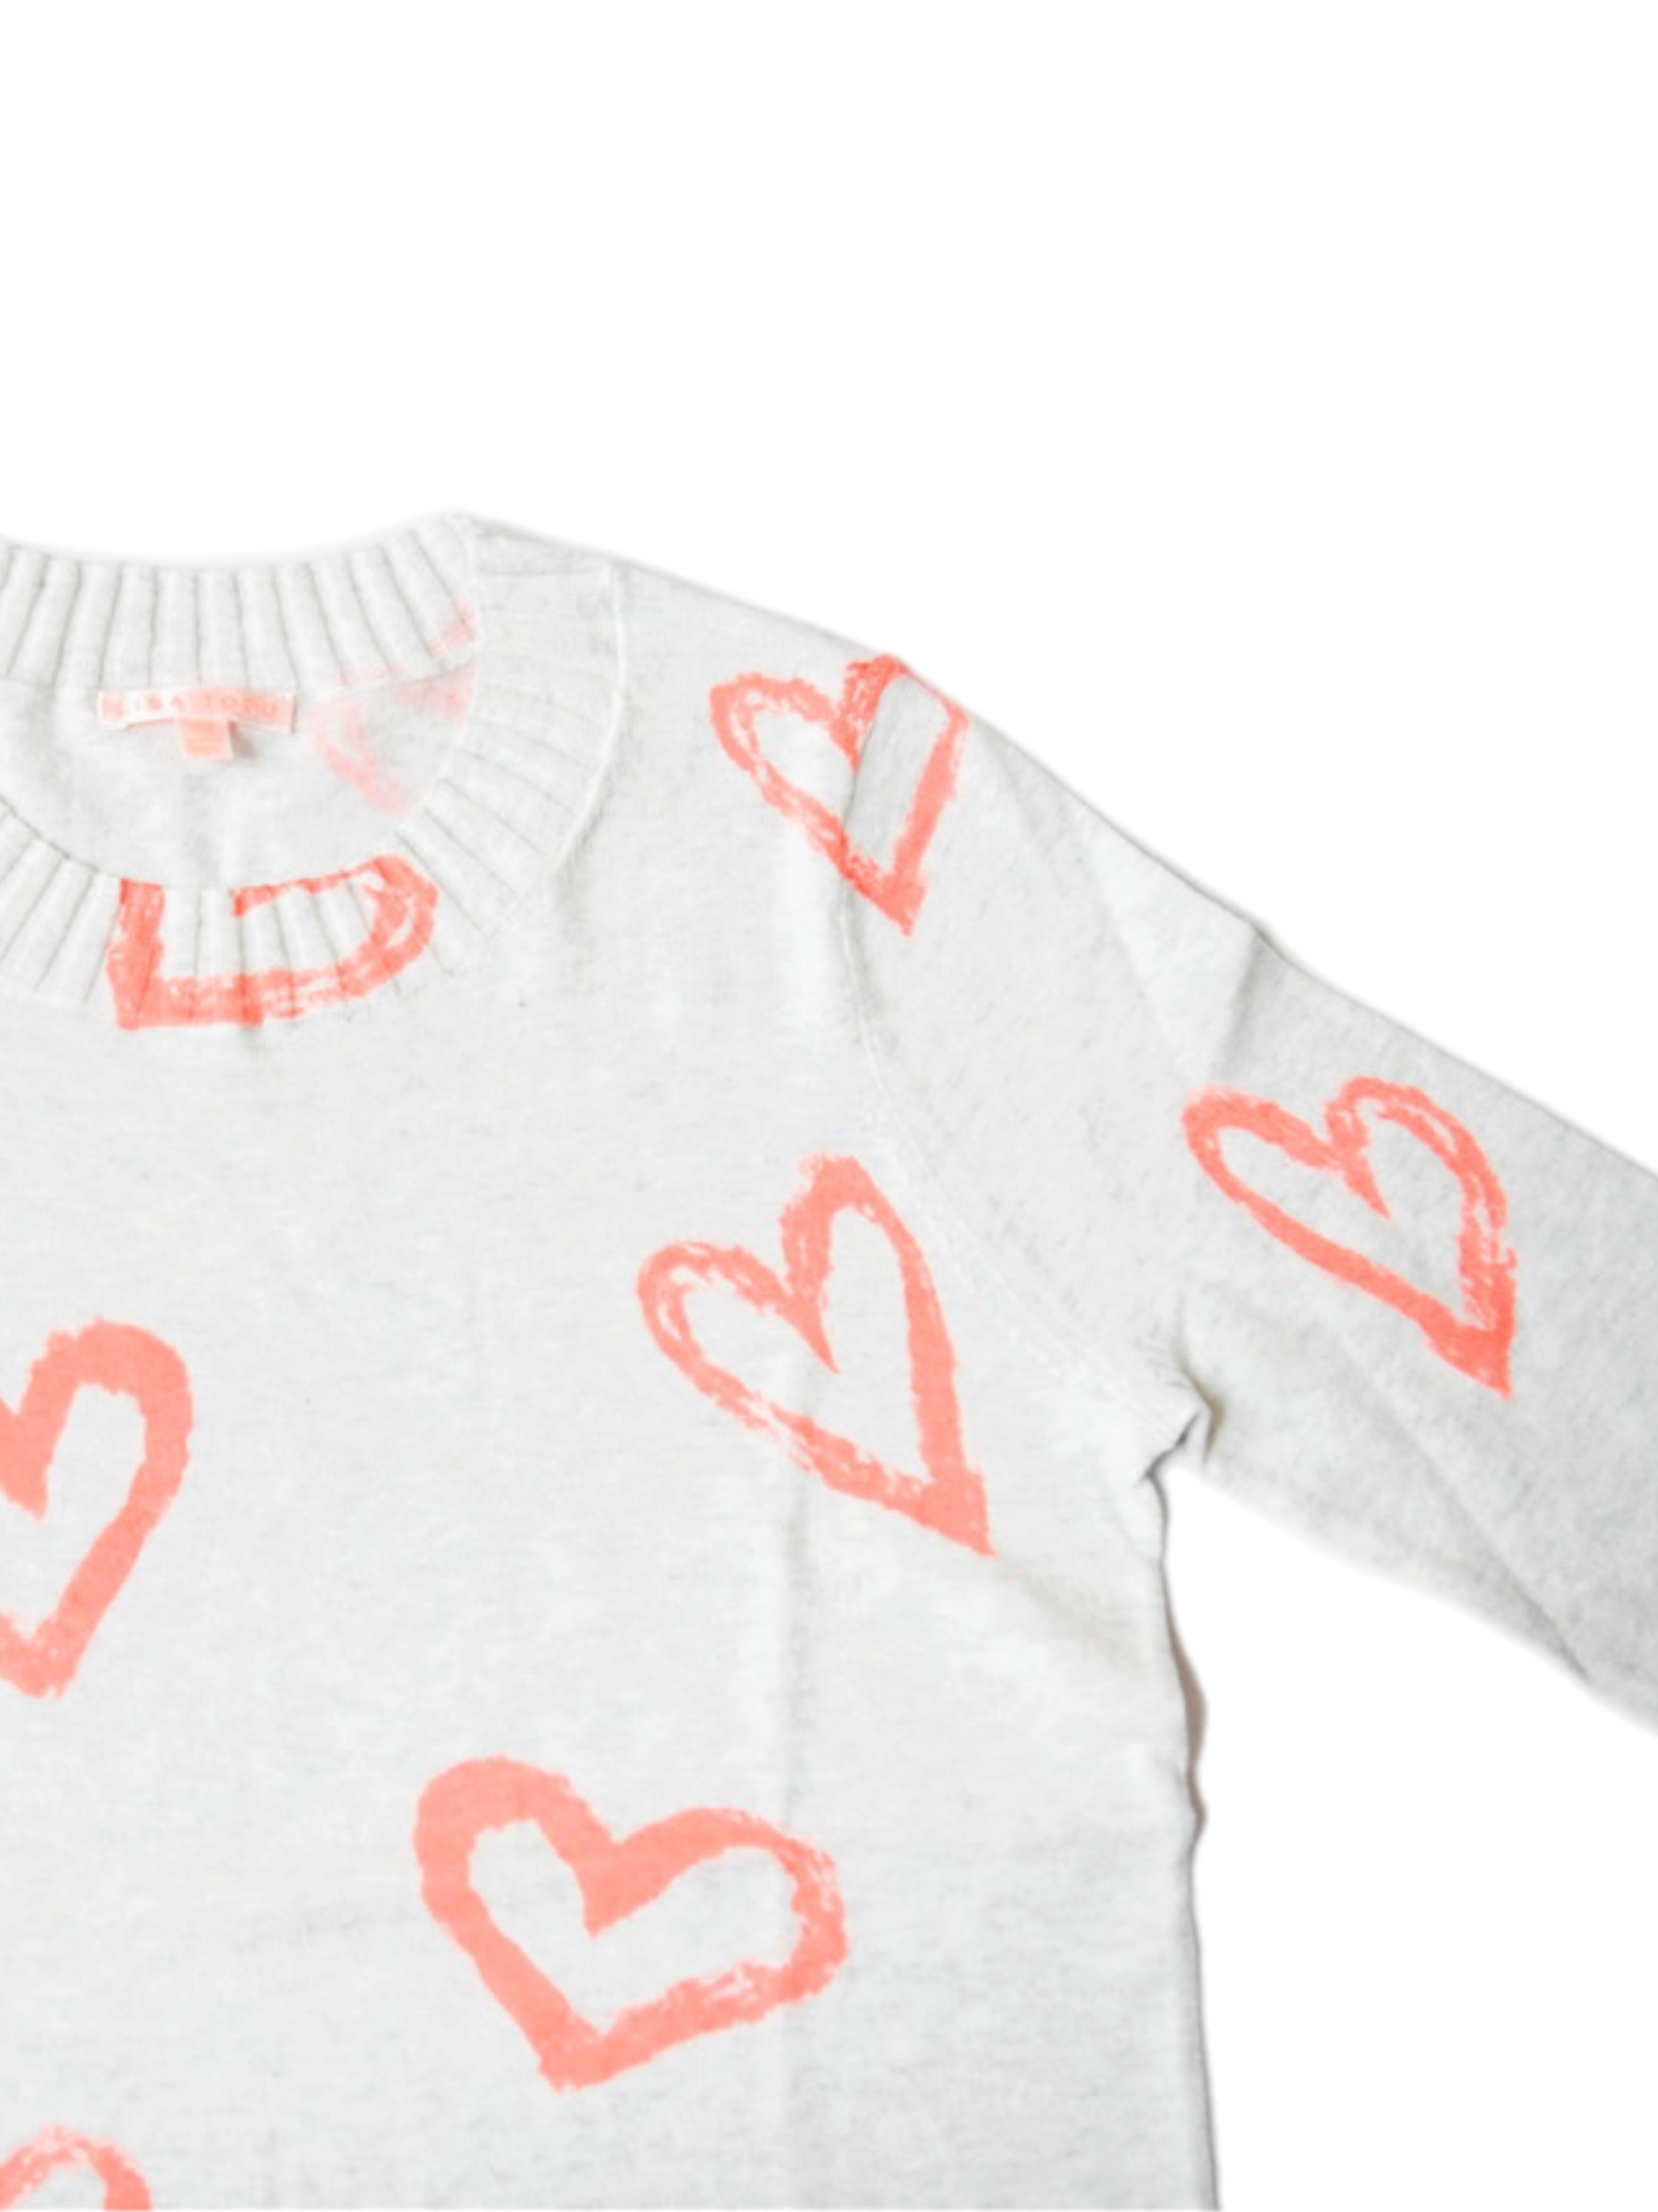 LISA TODD MINERAL LOVE ZONE SWEATER